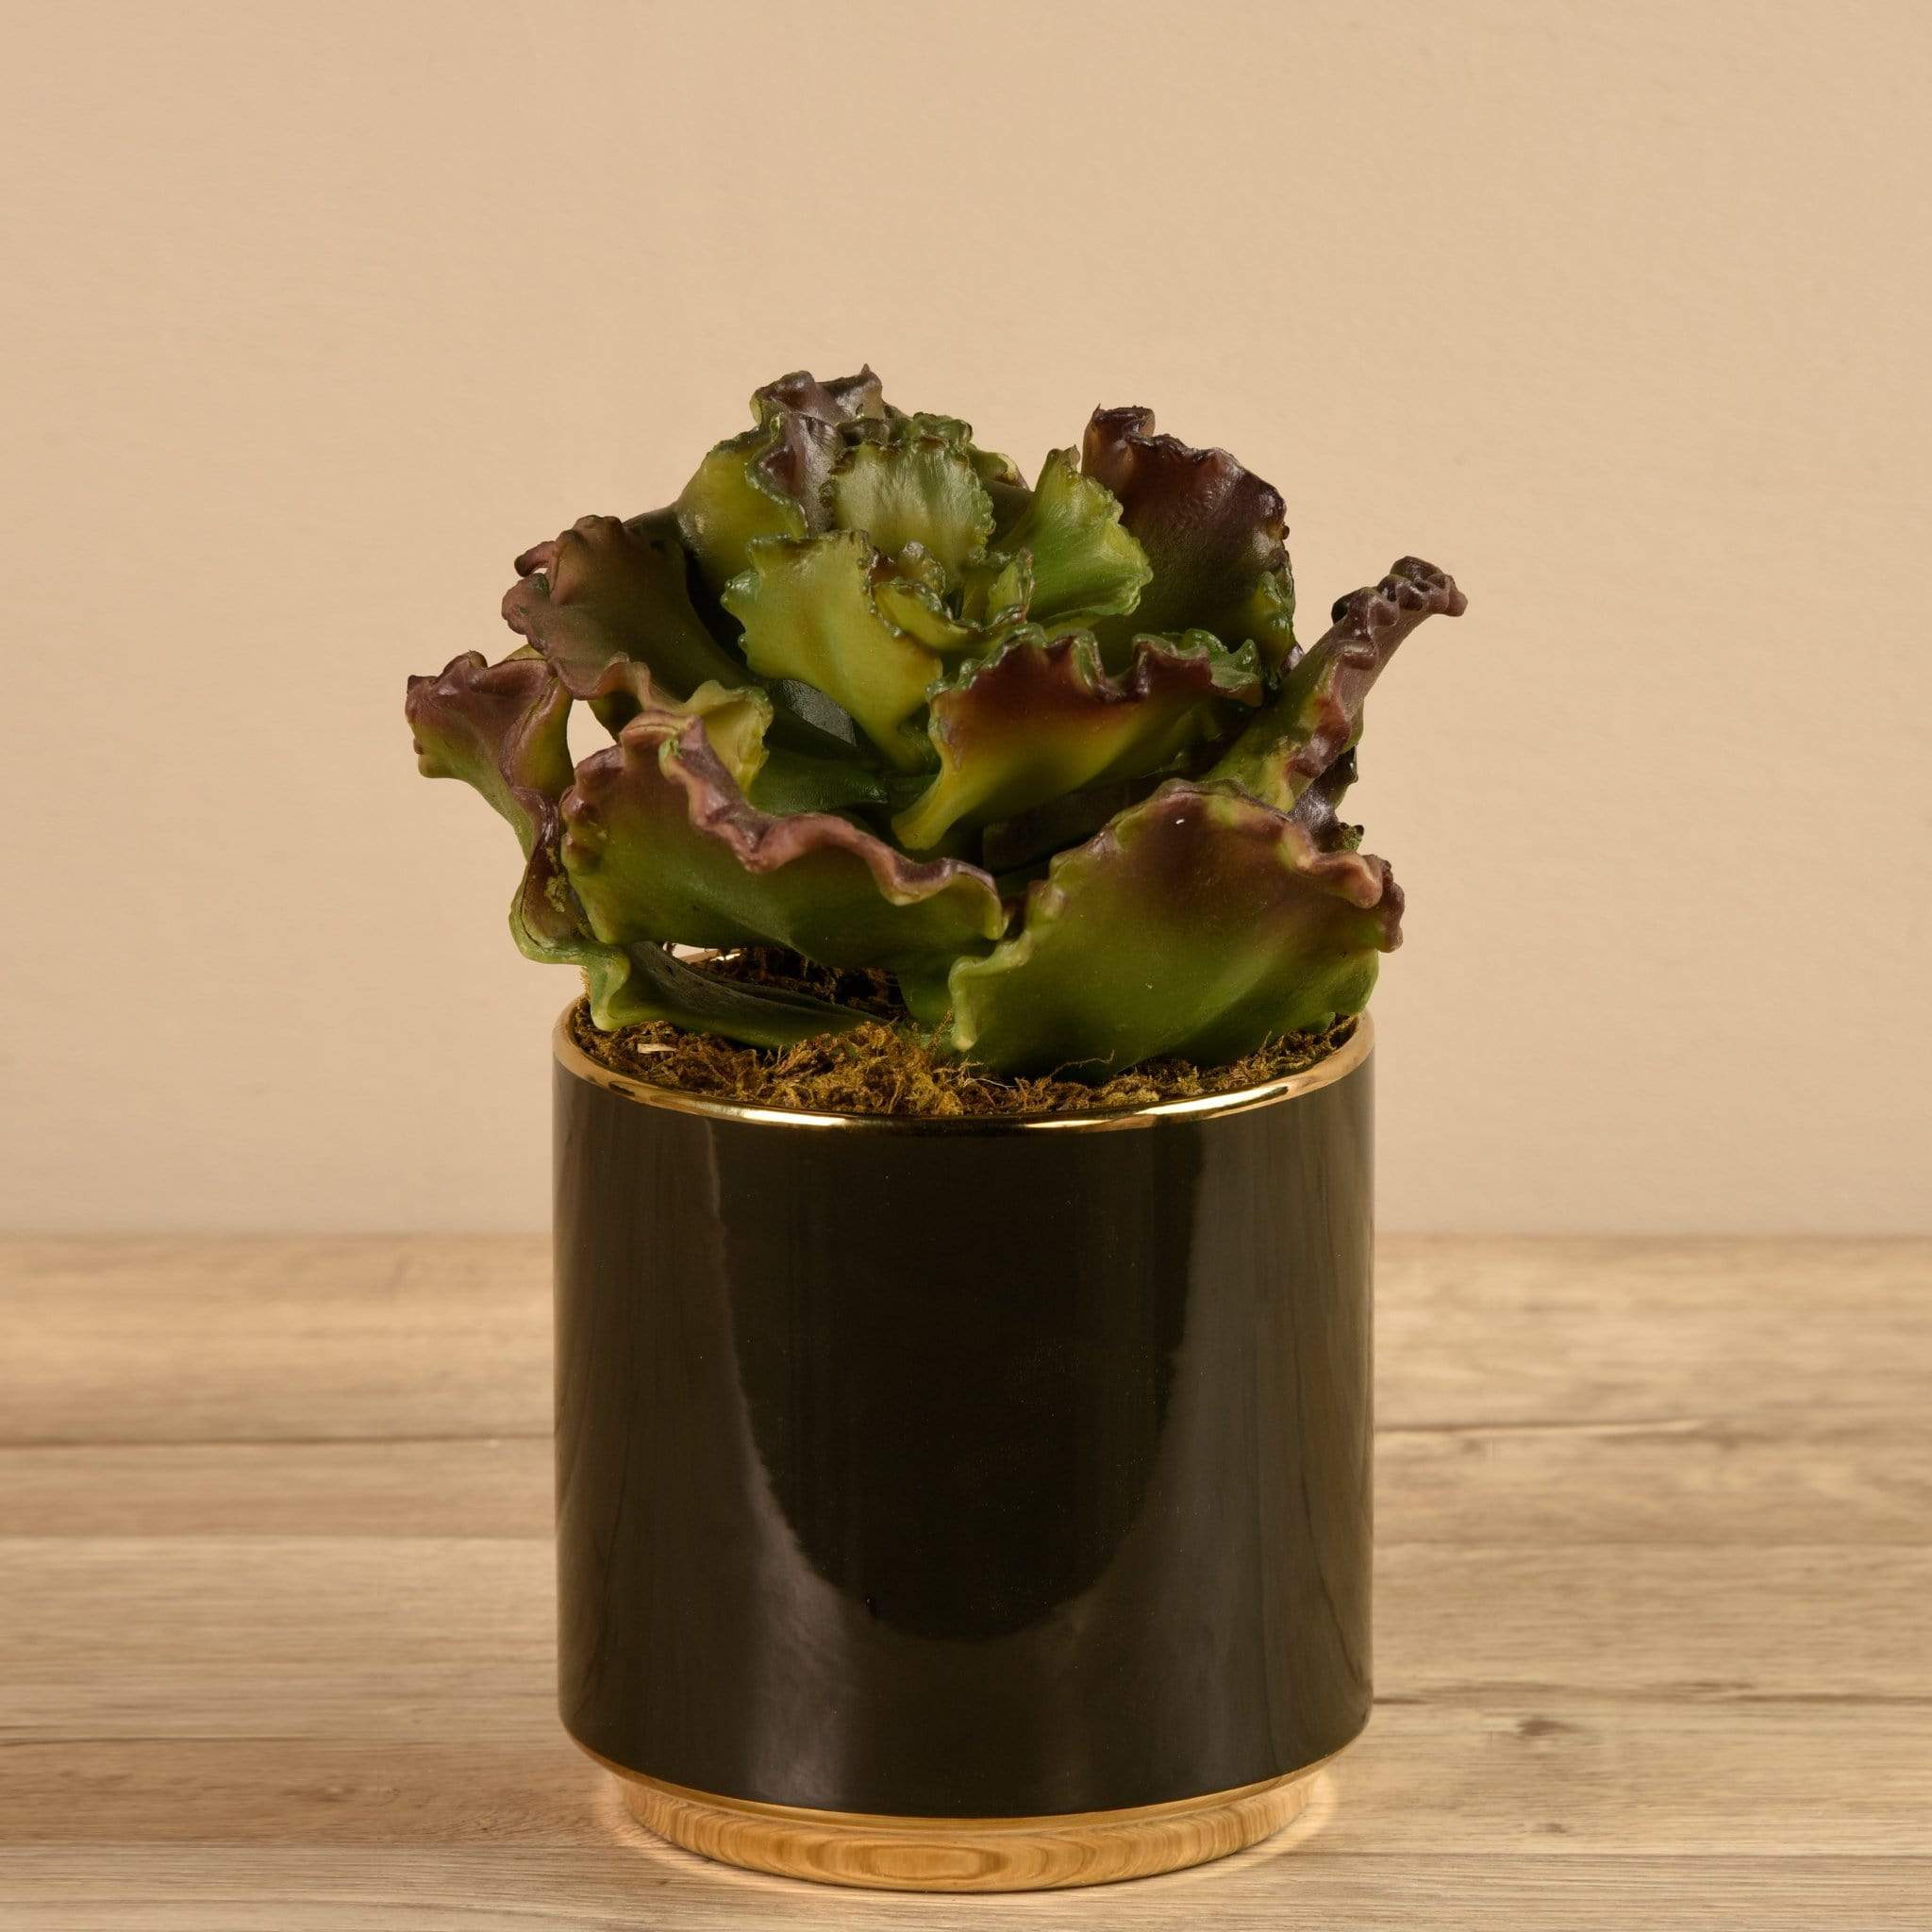 Artificial Potted Succulent - Bloomr